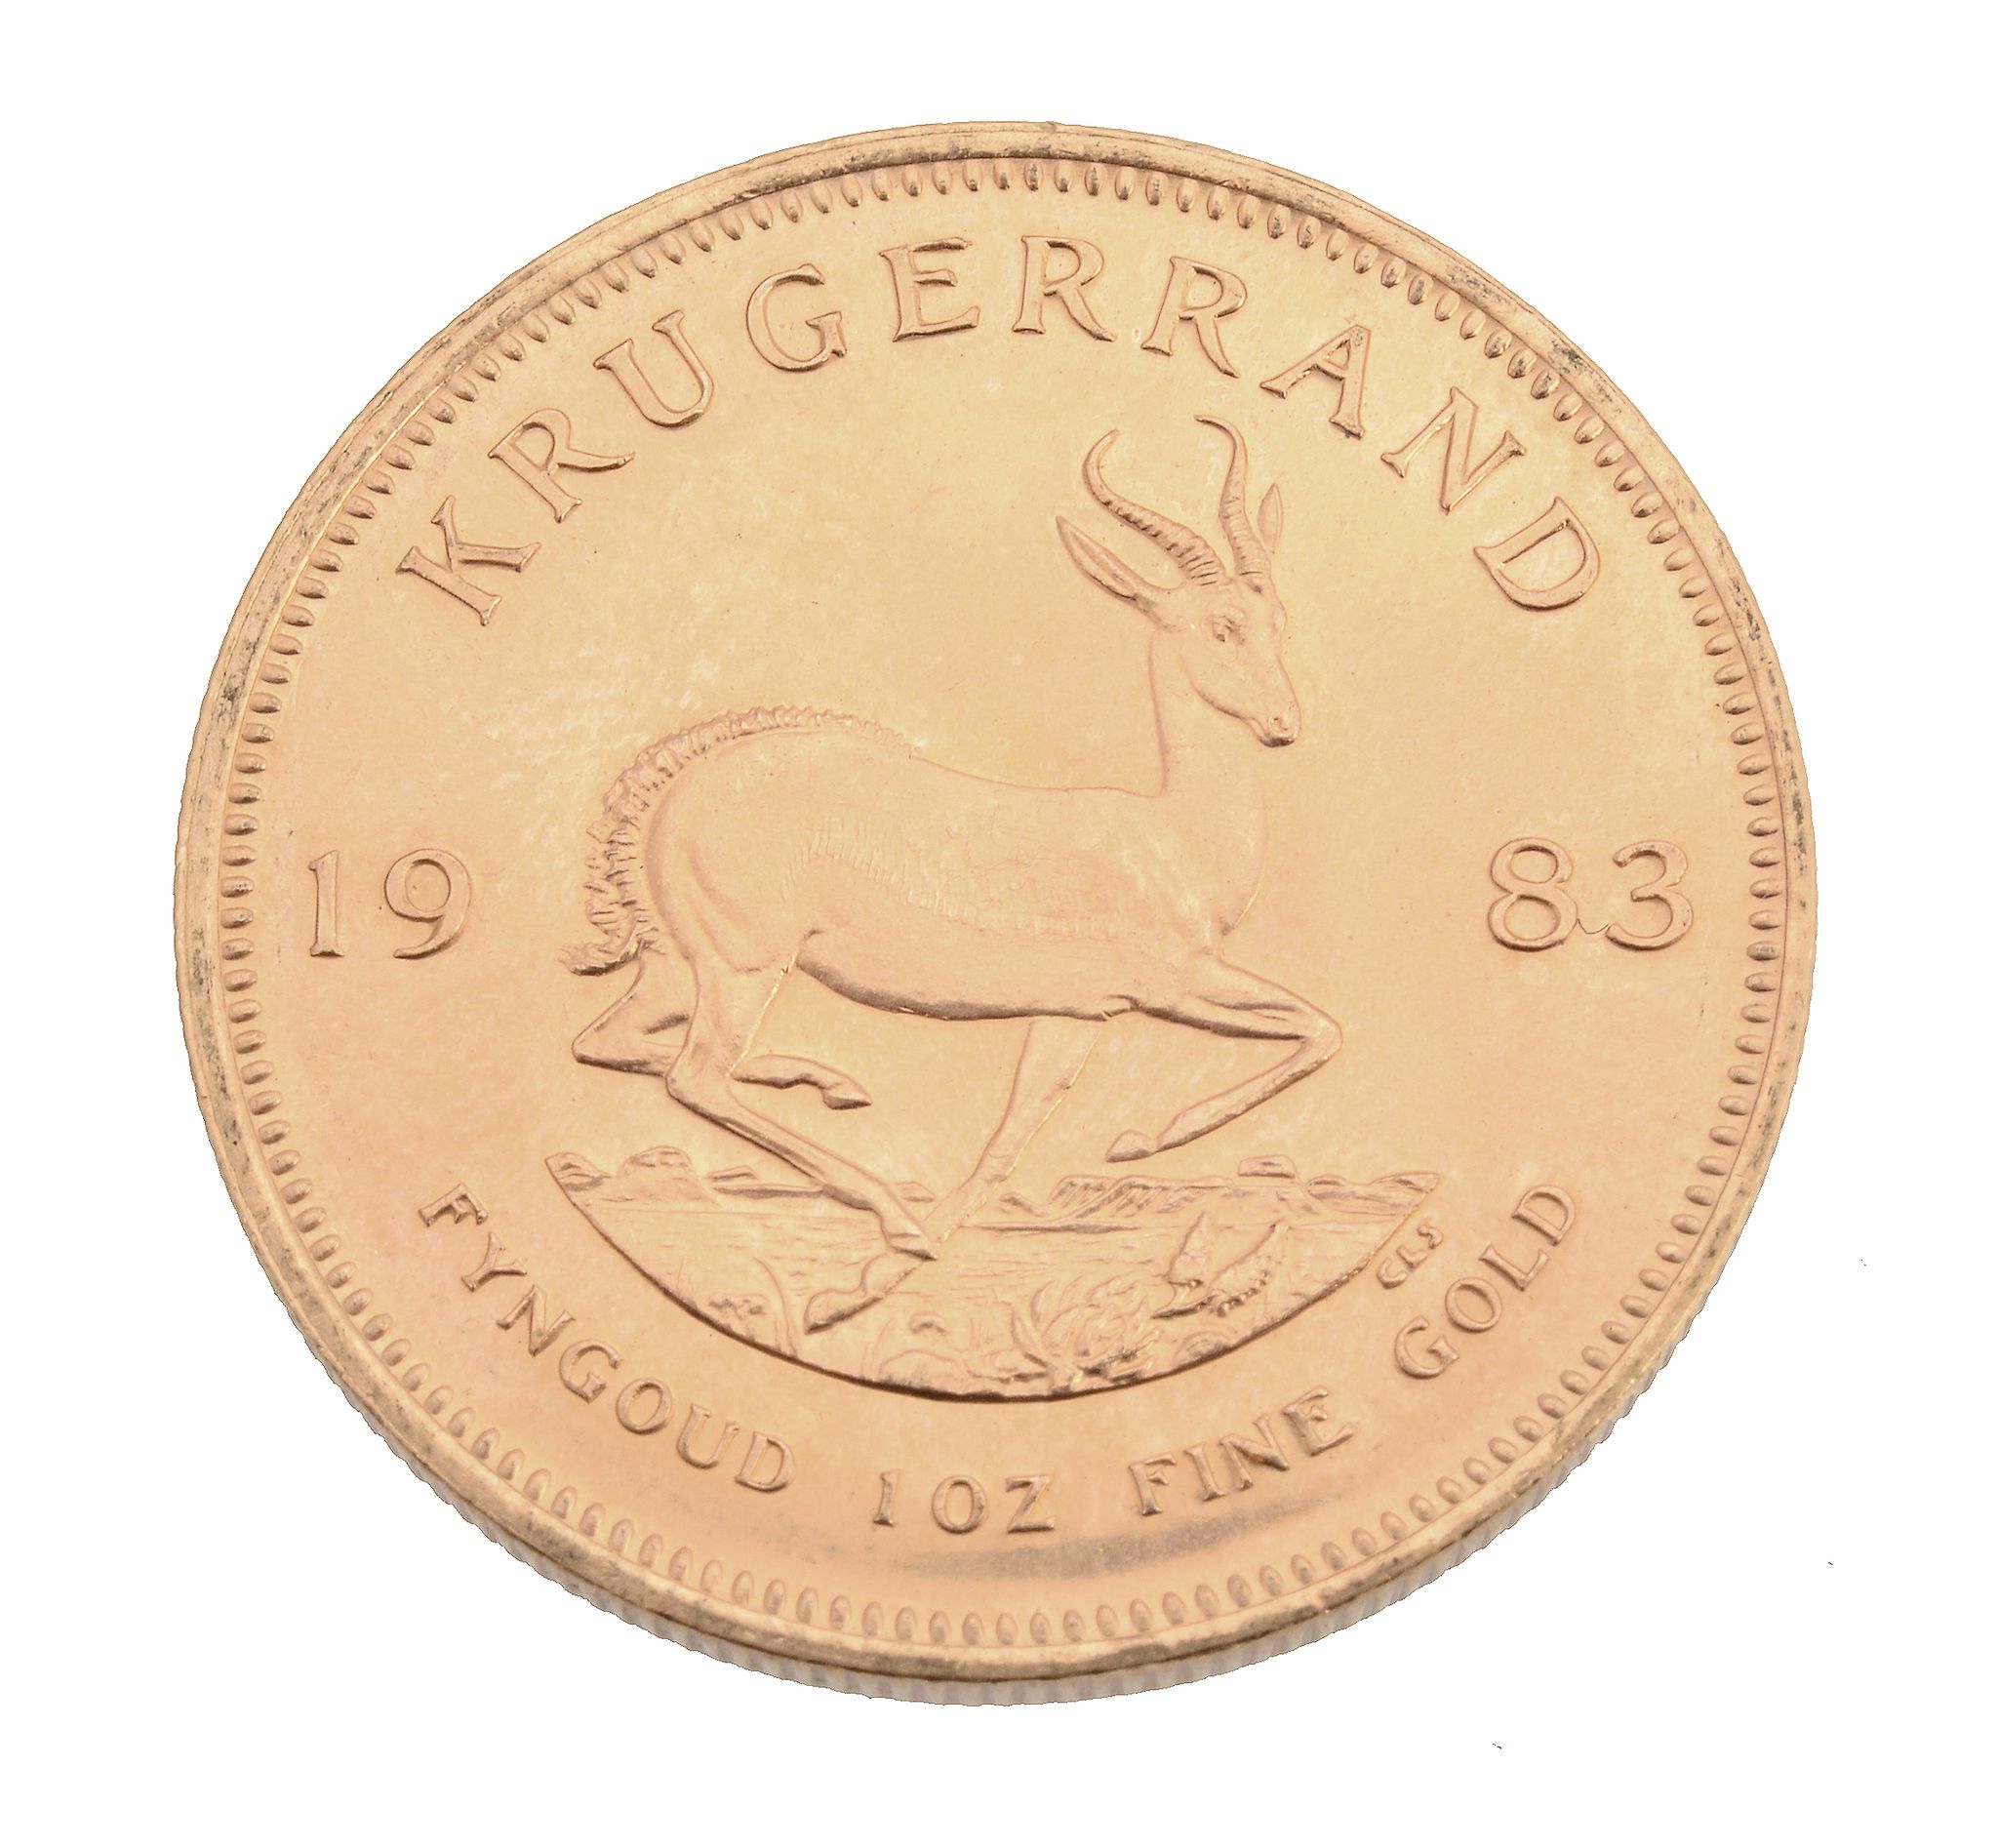 South Africa, gold Krugerrand 1983. Extremely fine, trace of sticker to obverse - Image 2 of 2